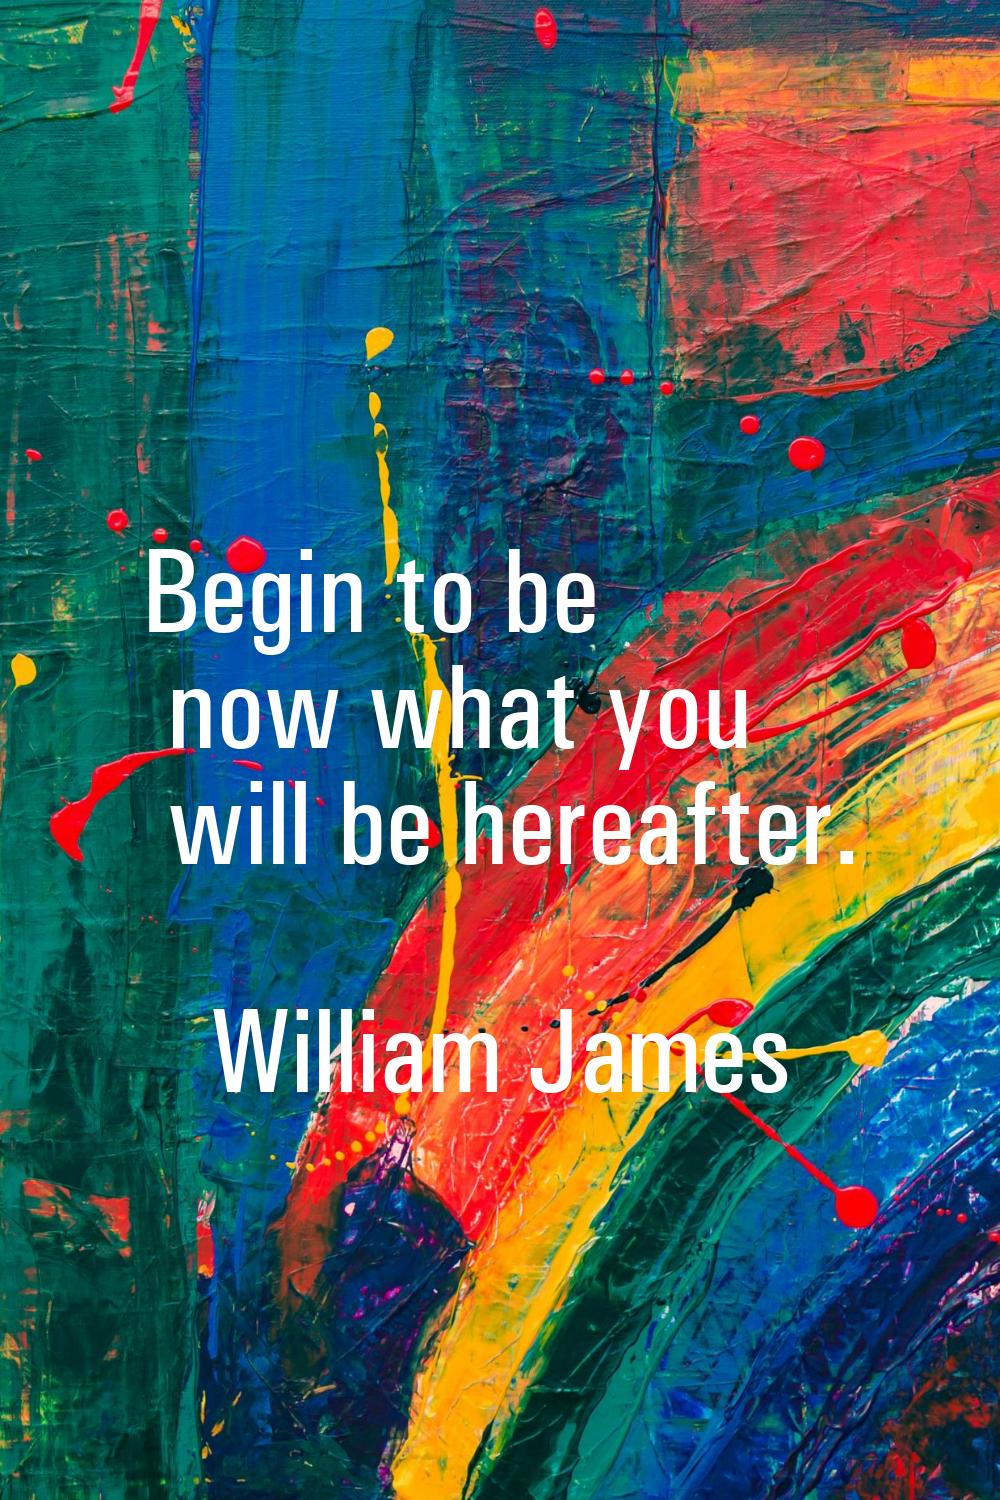 Begin to be now what you will be hereafter.